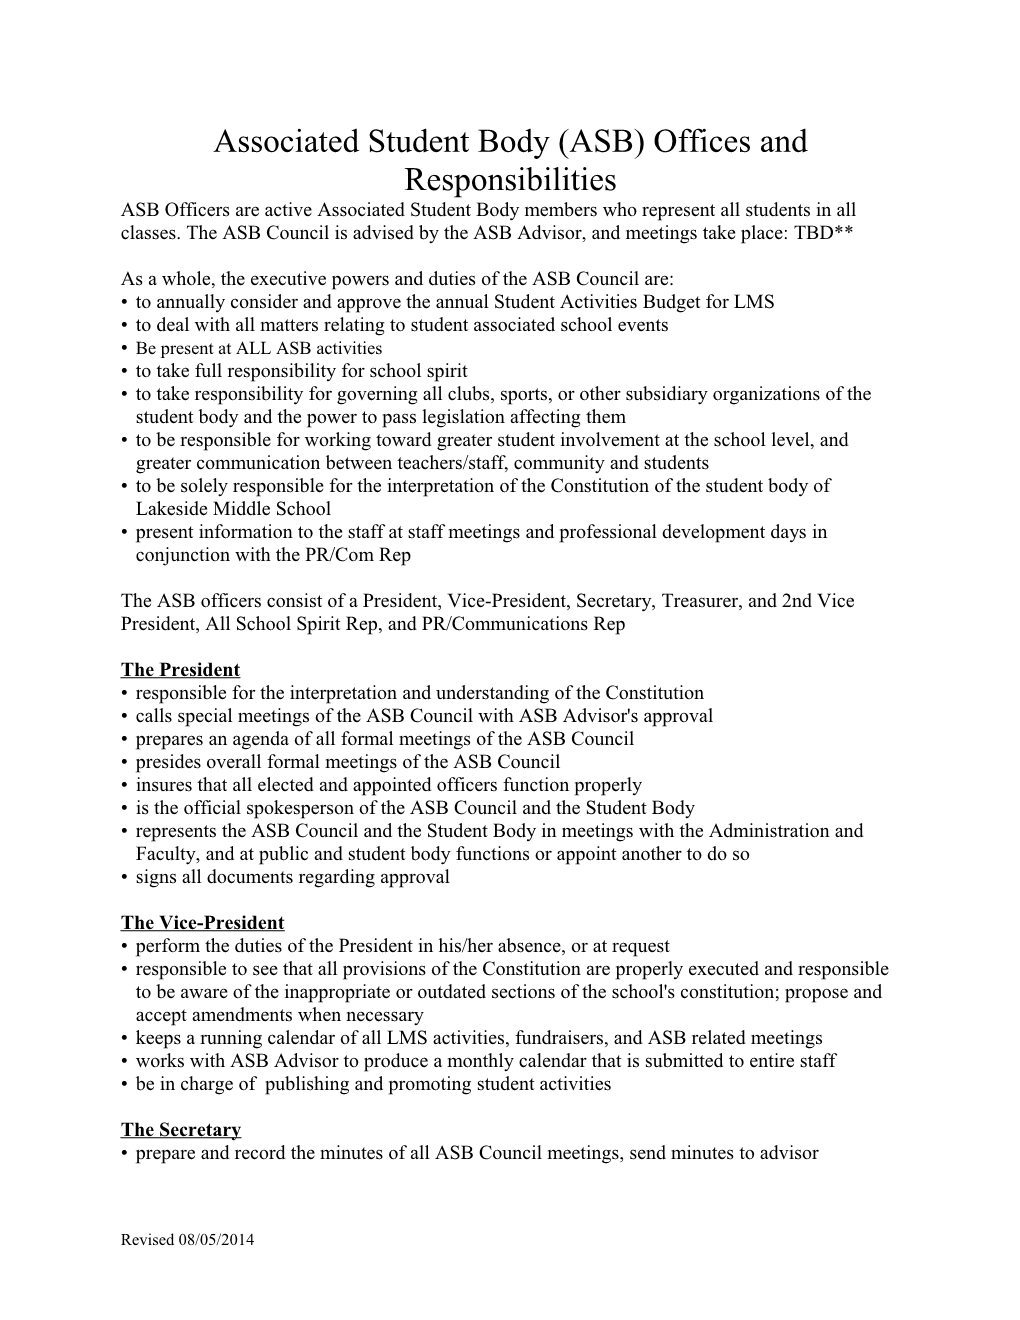 Associated Student Body (ASB) Offices and Responsibilities